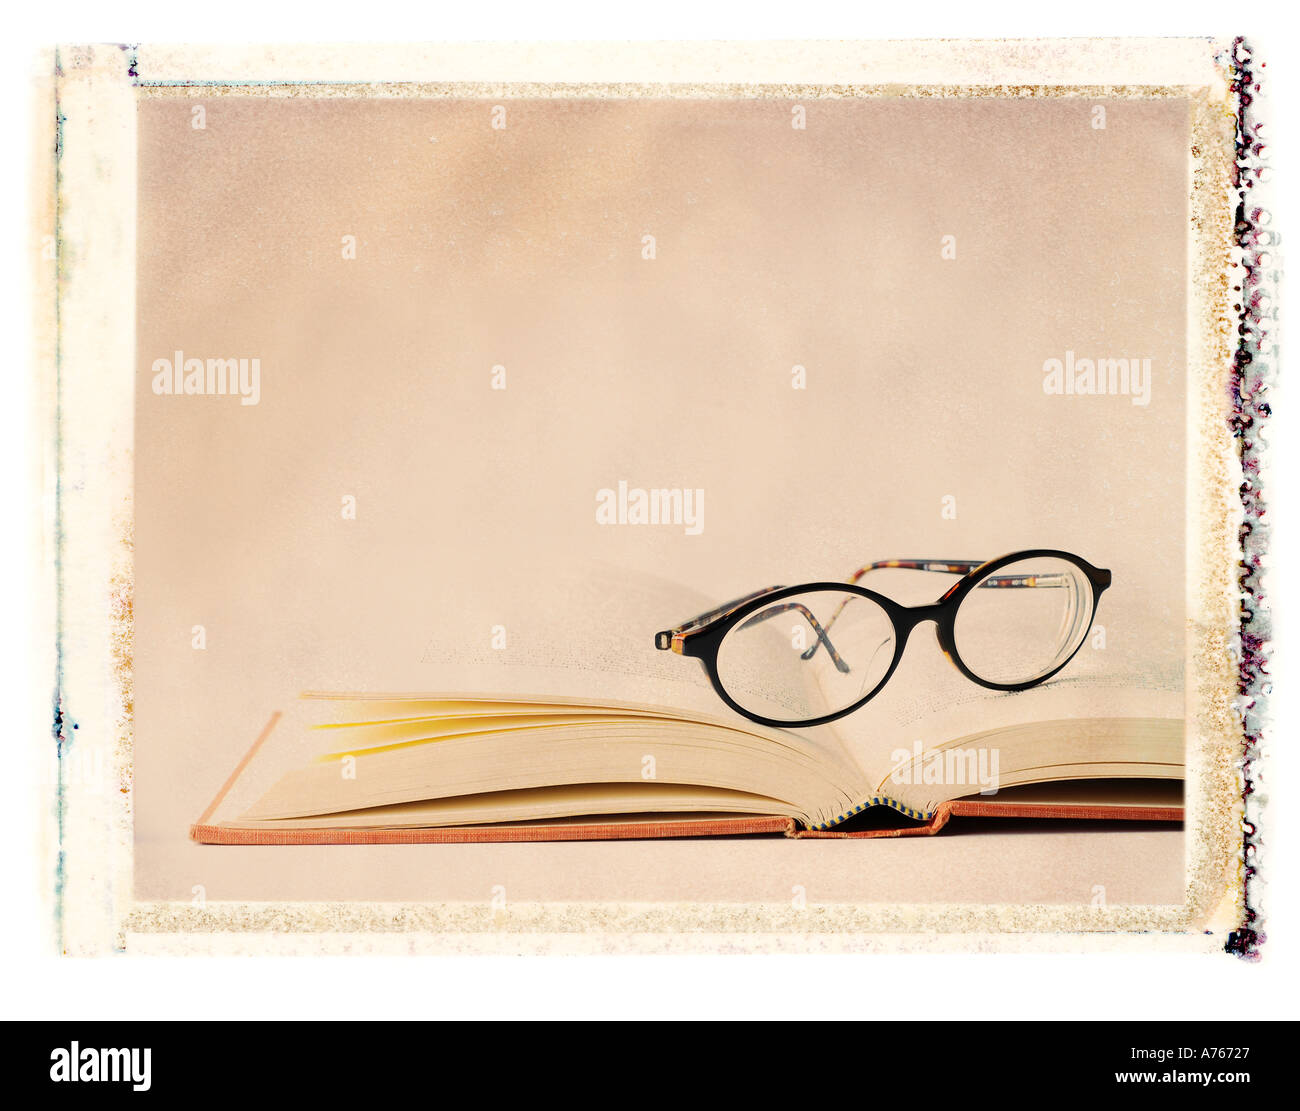 eye glasses sitting on an open book Stock Photo